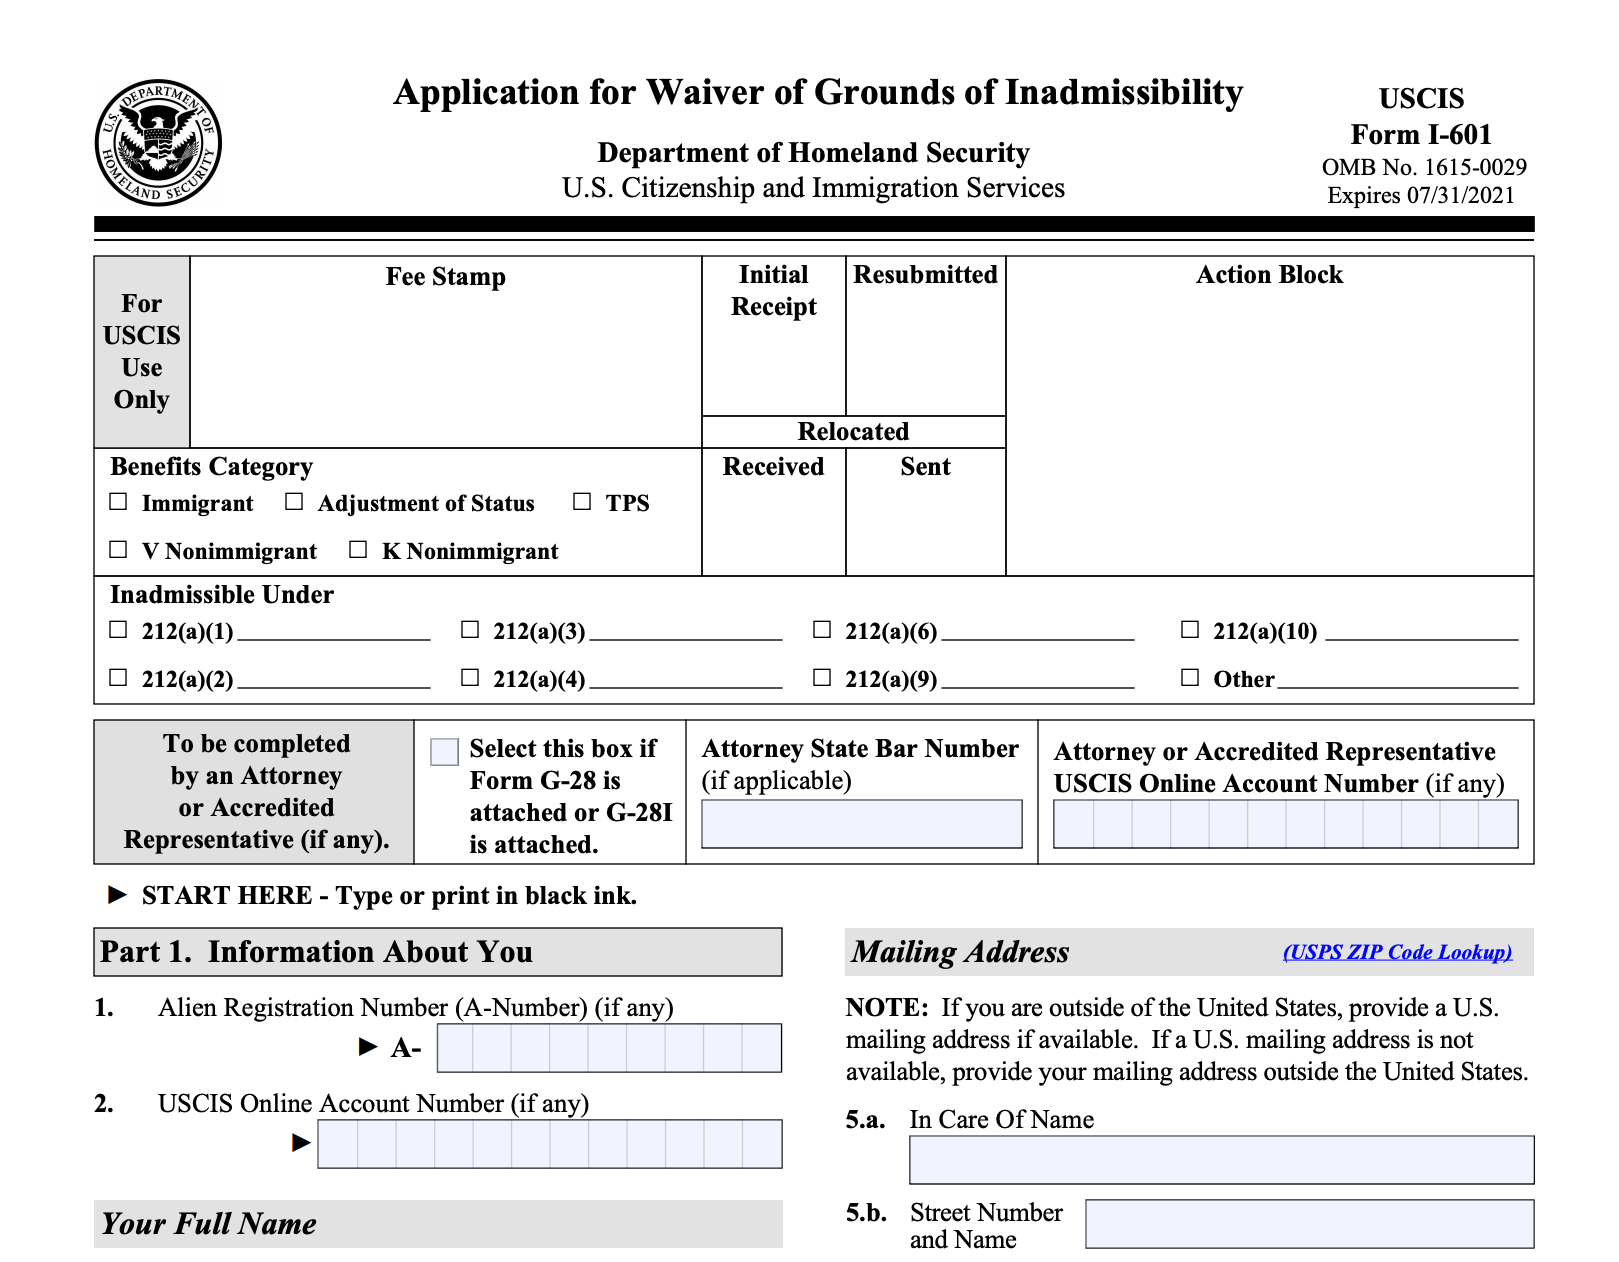 Forms I601, I601A Applying For a Waiver of Inadmissibility